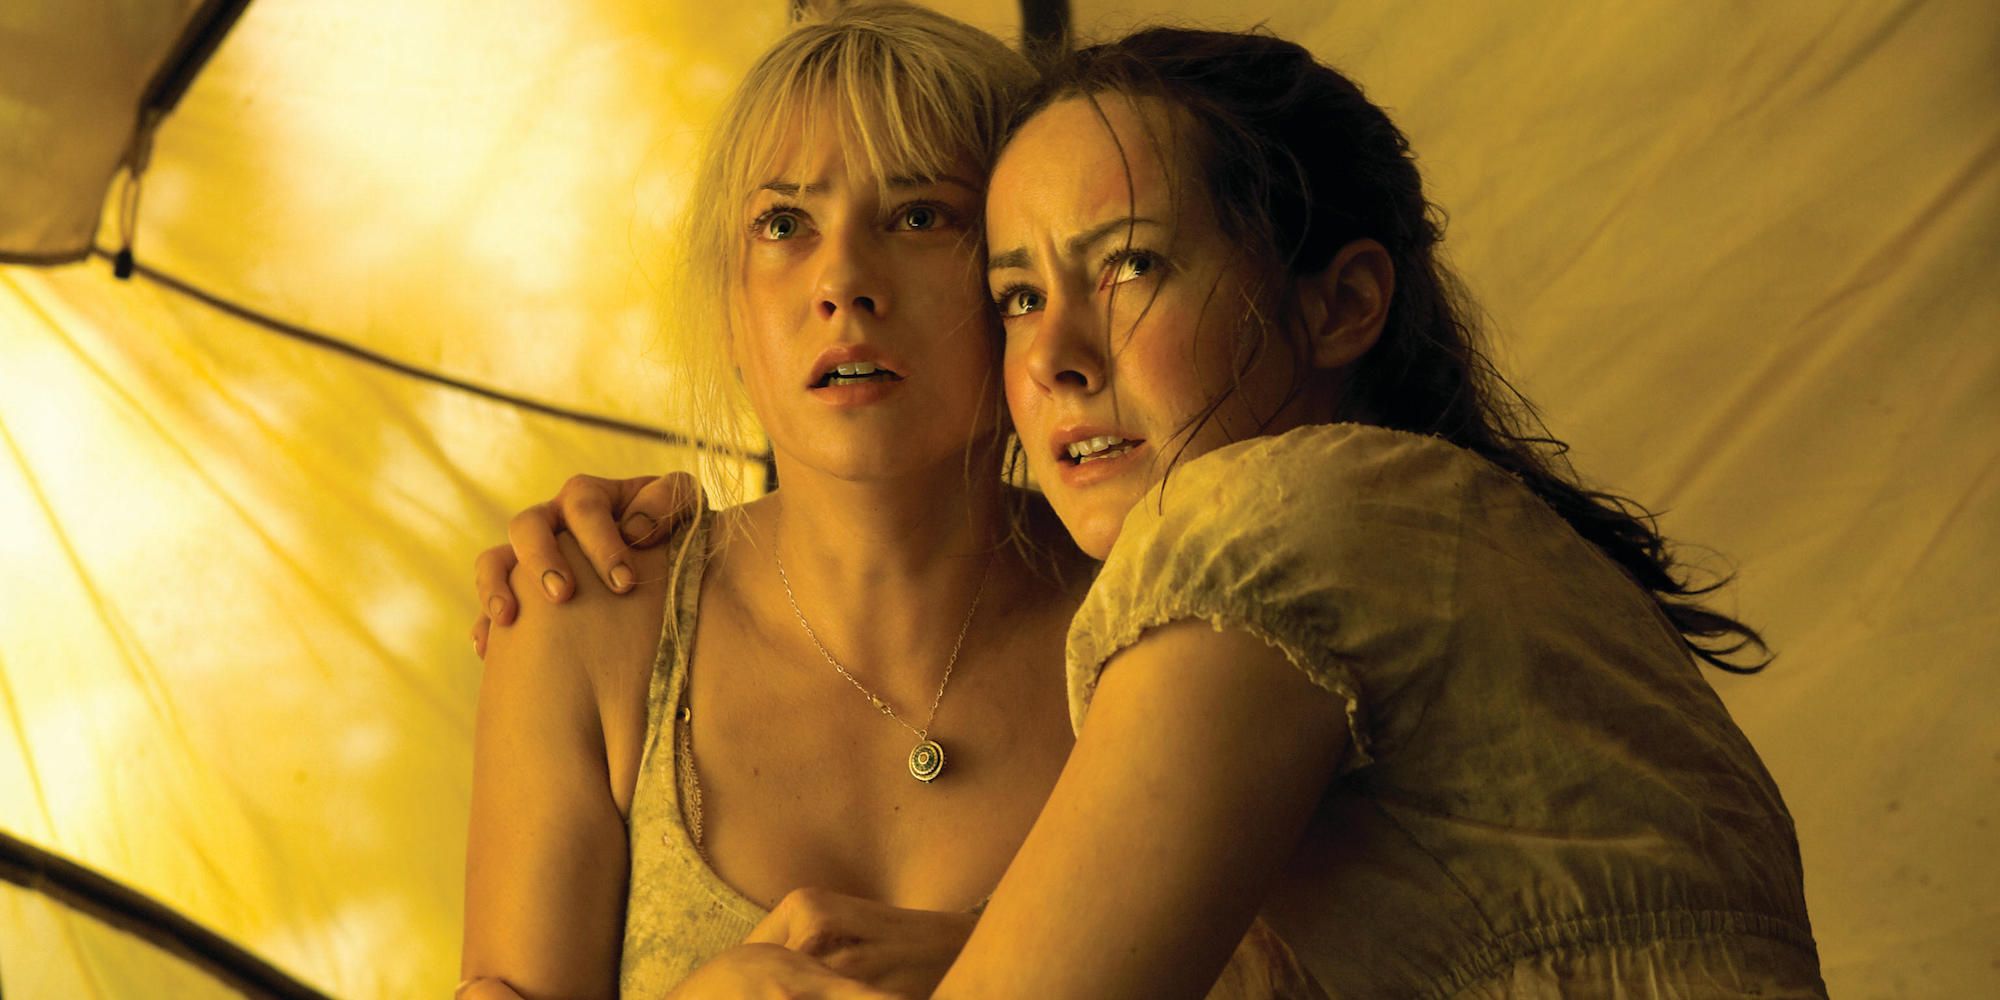 Jenna Malone and Laura Ramsey cower in a tent, looking up at someone in The Ruins